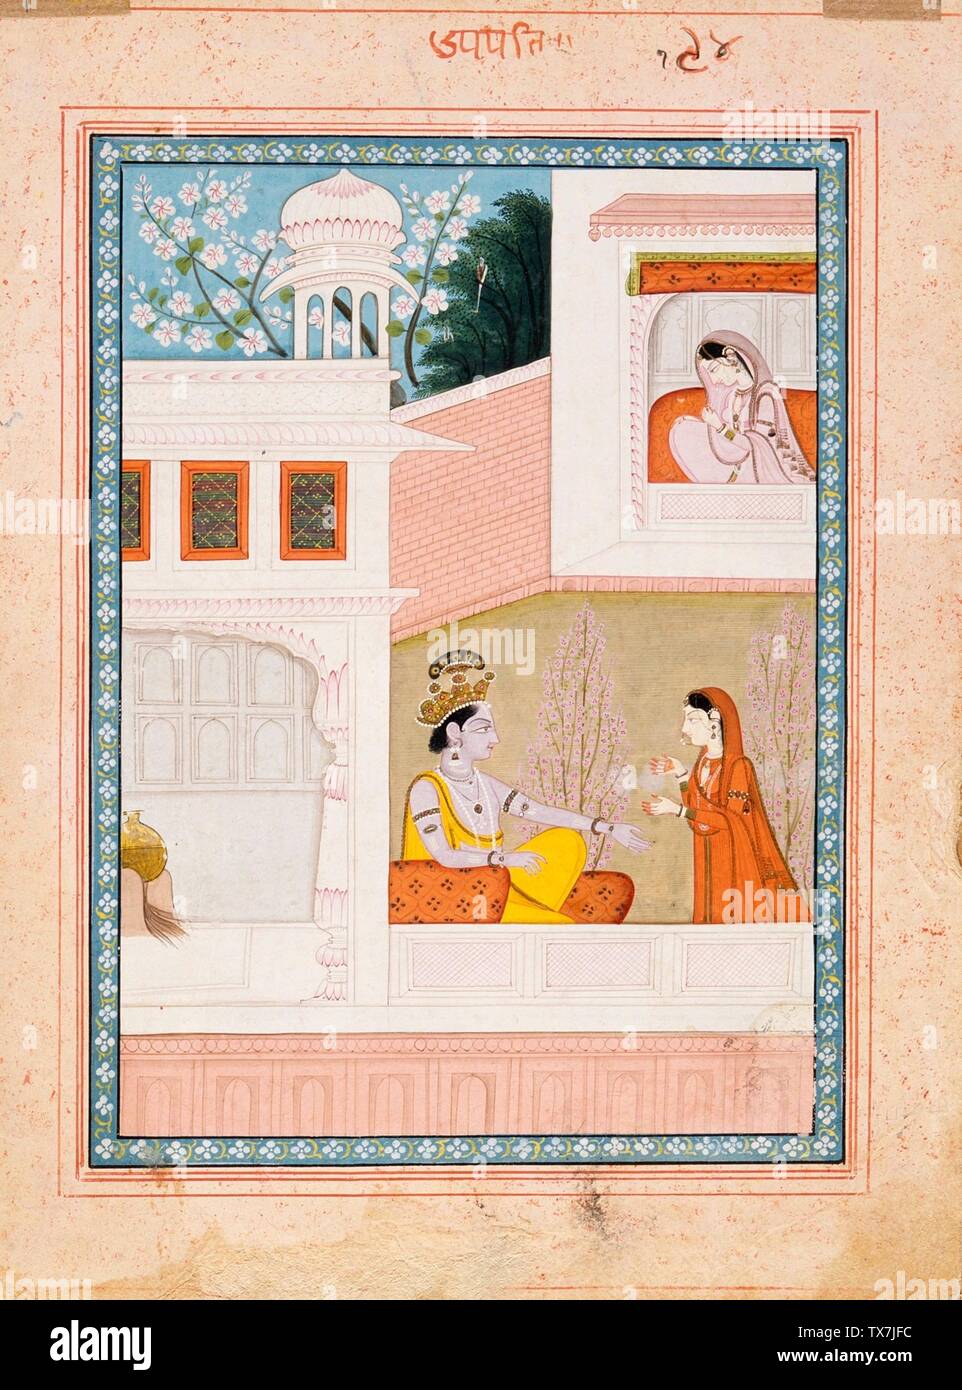 Krishna Talks to Radha's Maidservant, Folio from a Satsai (Seven Hundred Verses) of Bihari Lal;  India, Himachal Pradesh, Kangra, circa 1825 Drawings; watercolors Opaque watercolor, gold, and ink on paper Image:  8 1/4 x 5 7/8 in. (20.95 x 14.92 cm); Sheet:  11 1/8 x 8 1/4 in. (28.25 x 20.95 cm) Gift of Jane Greenough Green in memory of Edward Pelton Green (AC1999.127.5) South and Southeast Asian Art; circa 1825 date QS:P571,+1825-00-00T00:00:00Z/9,P1480,Q5727902; Stock Photo